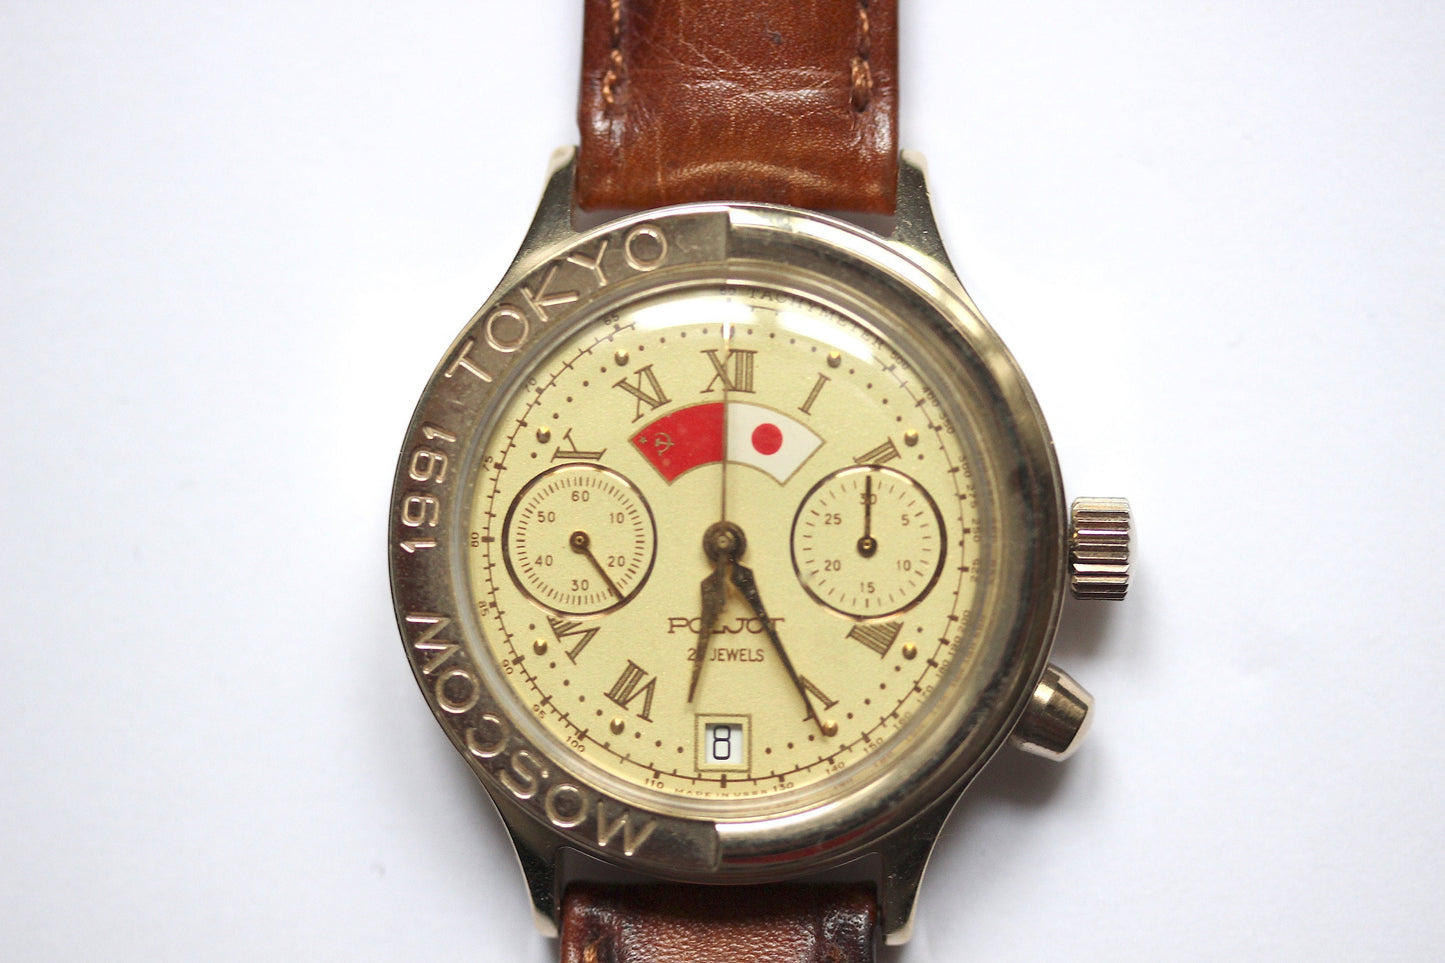 Chronograph watch „POLJOT“ 3133, Moscow - Tokyo 1991 Limited Edition: 01753/10000